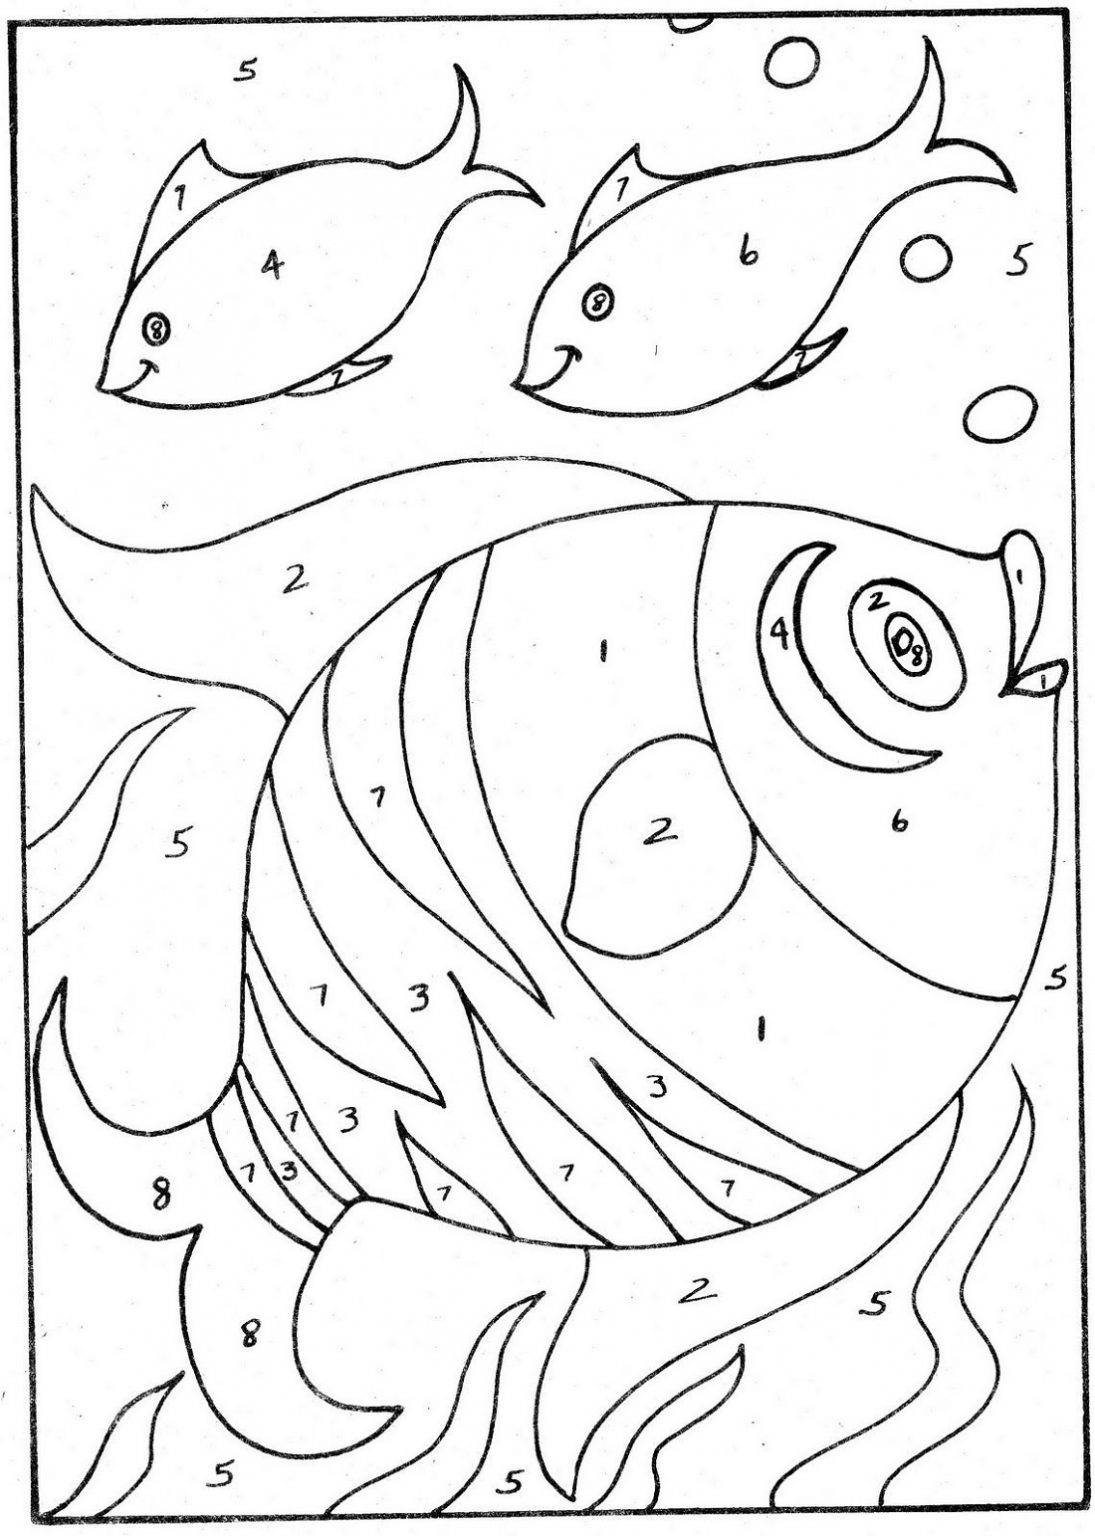 Number Coloring Pages for Preschool | 101 Coloring